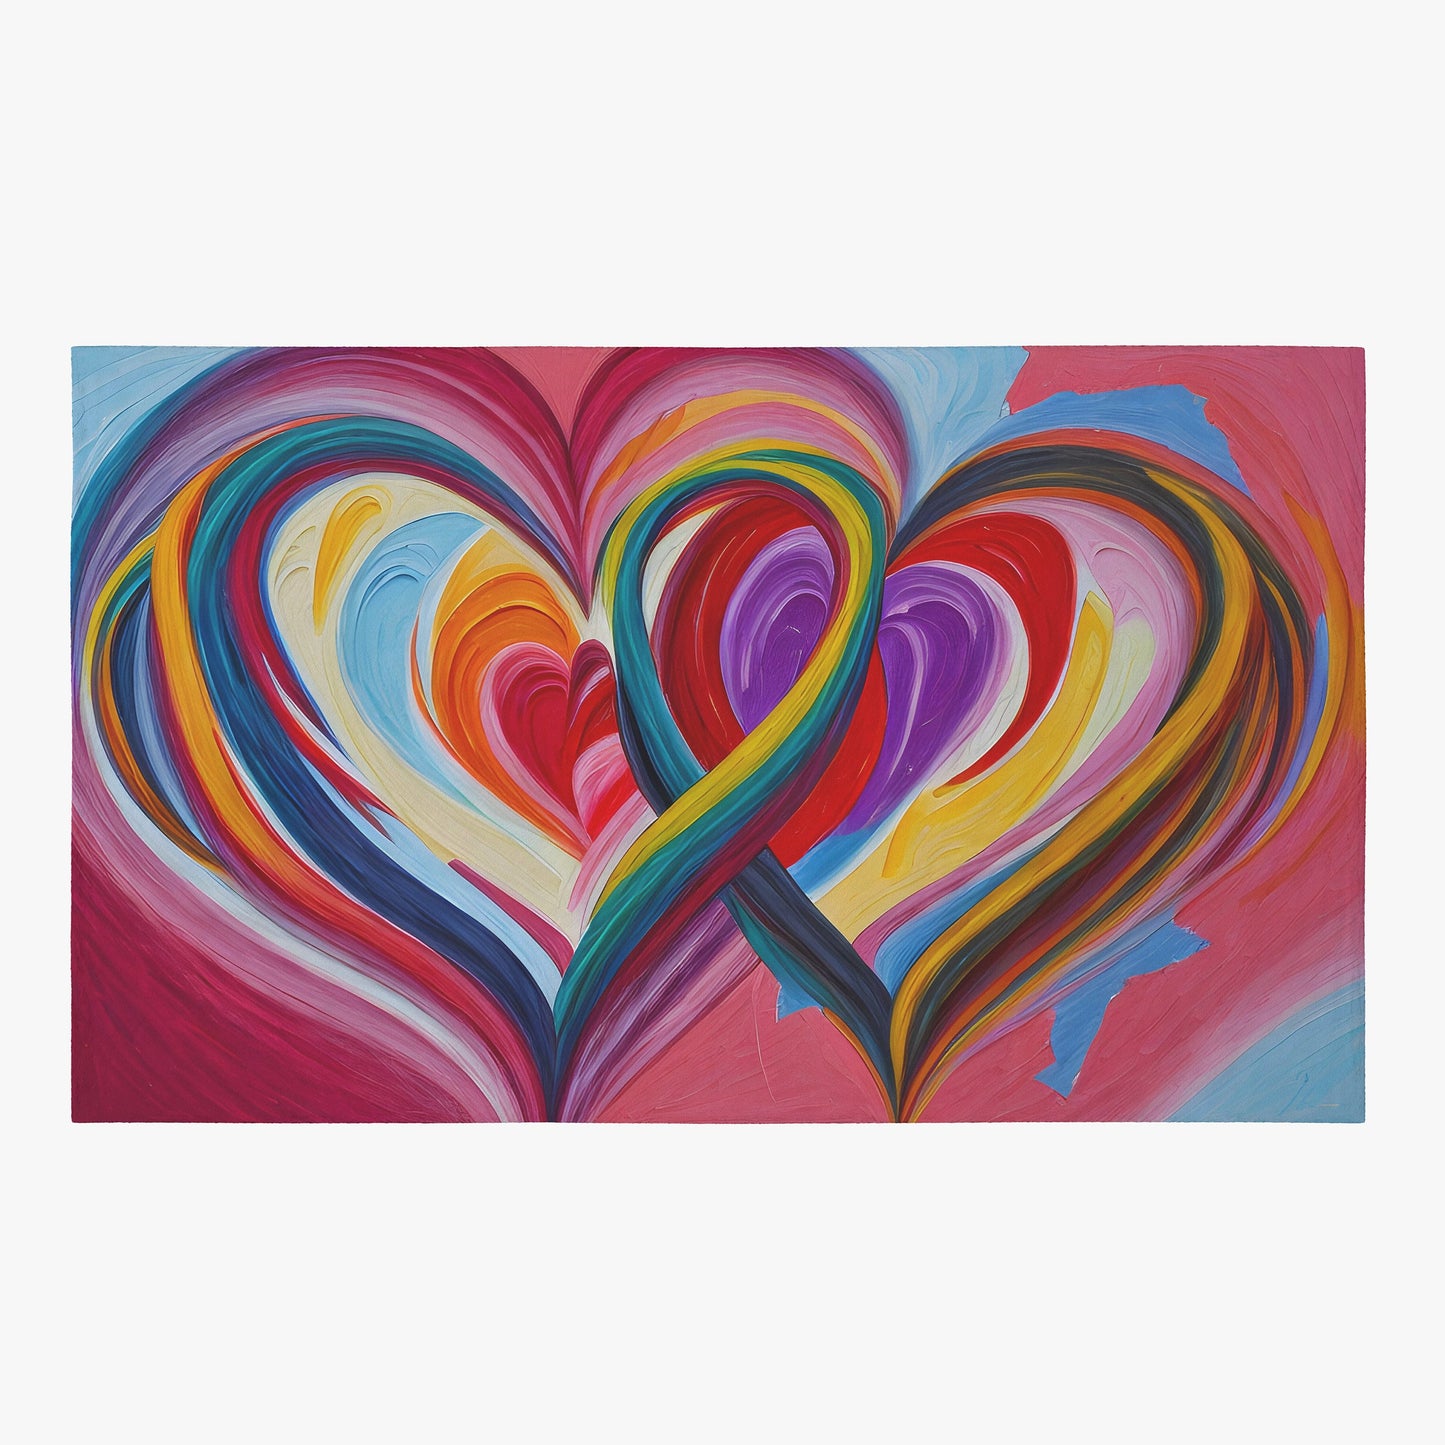 Colorful Hearts Rug 2 hearts intertwined Rug kids Floor Rug 4x6 5x7 8x10 Large rugs nursery rugs bright abstract